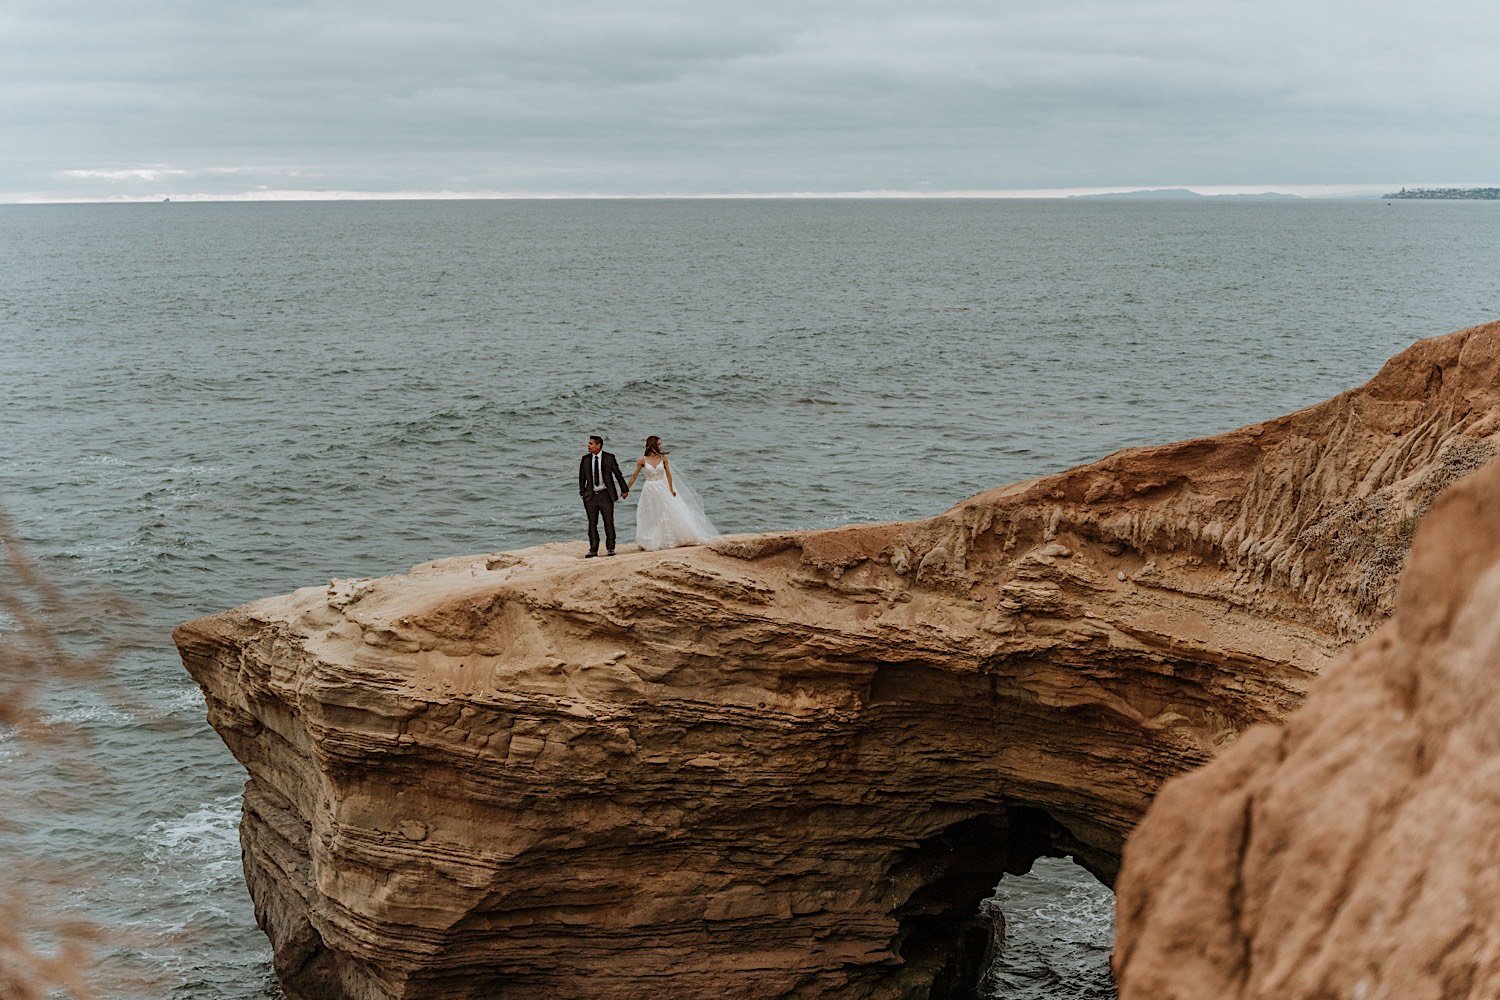 Bride and groom hold hands and look opposite directions while standing on a cliff overlooking the ocean